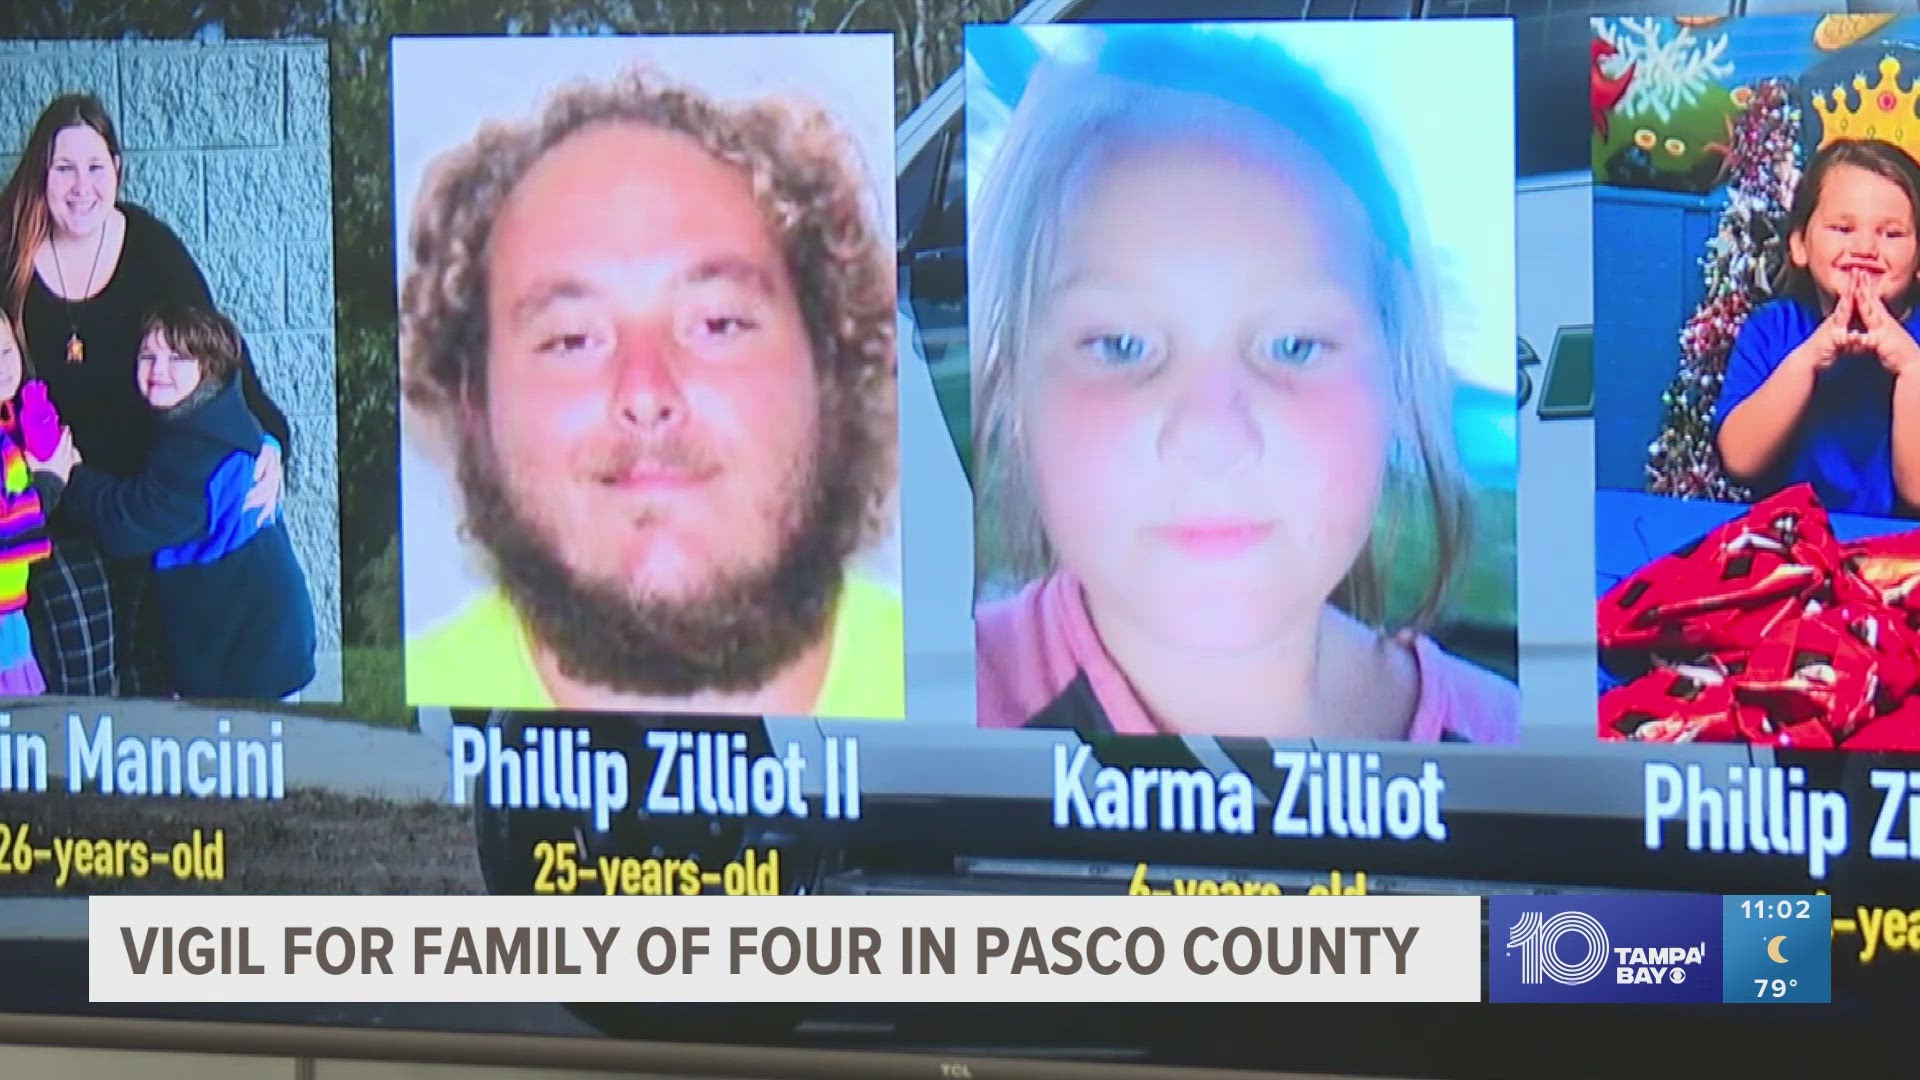 The murder suspect in the case of a missing Pasco County family told detectives that the bodies of all four family members were burned in his fire pit.